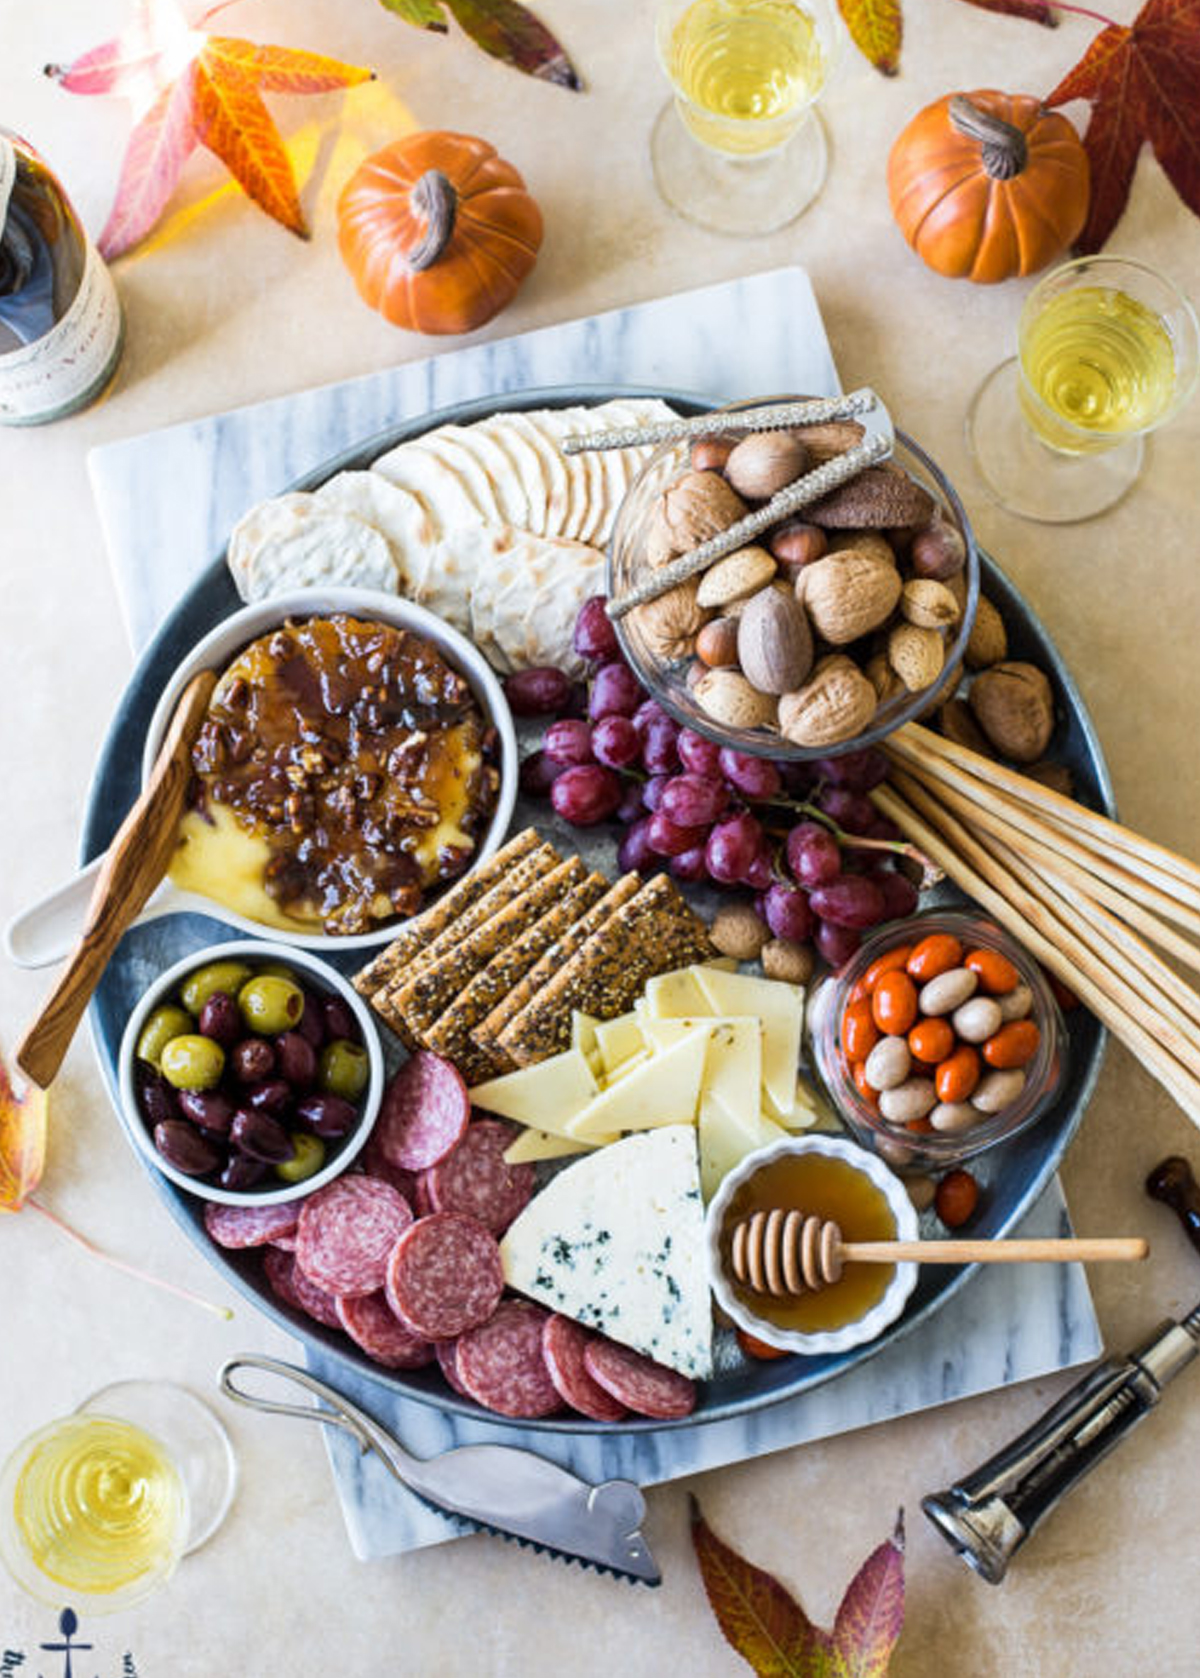 The Beach House Kitchen's board is full of brie, grapes, glazed pecans, crackers, bacon onion jam, and meat.